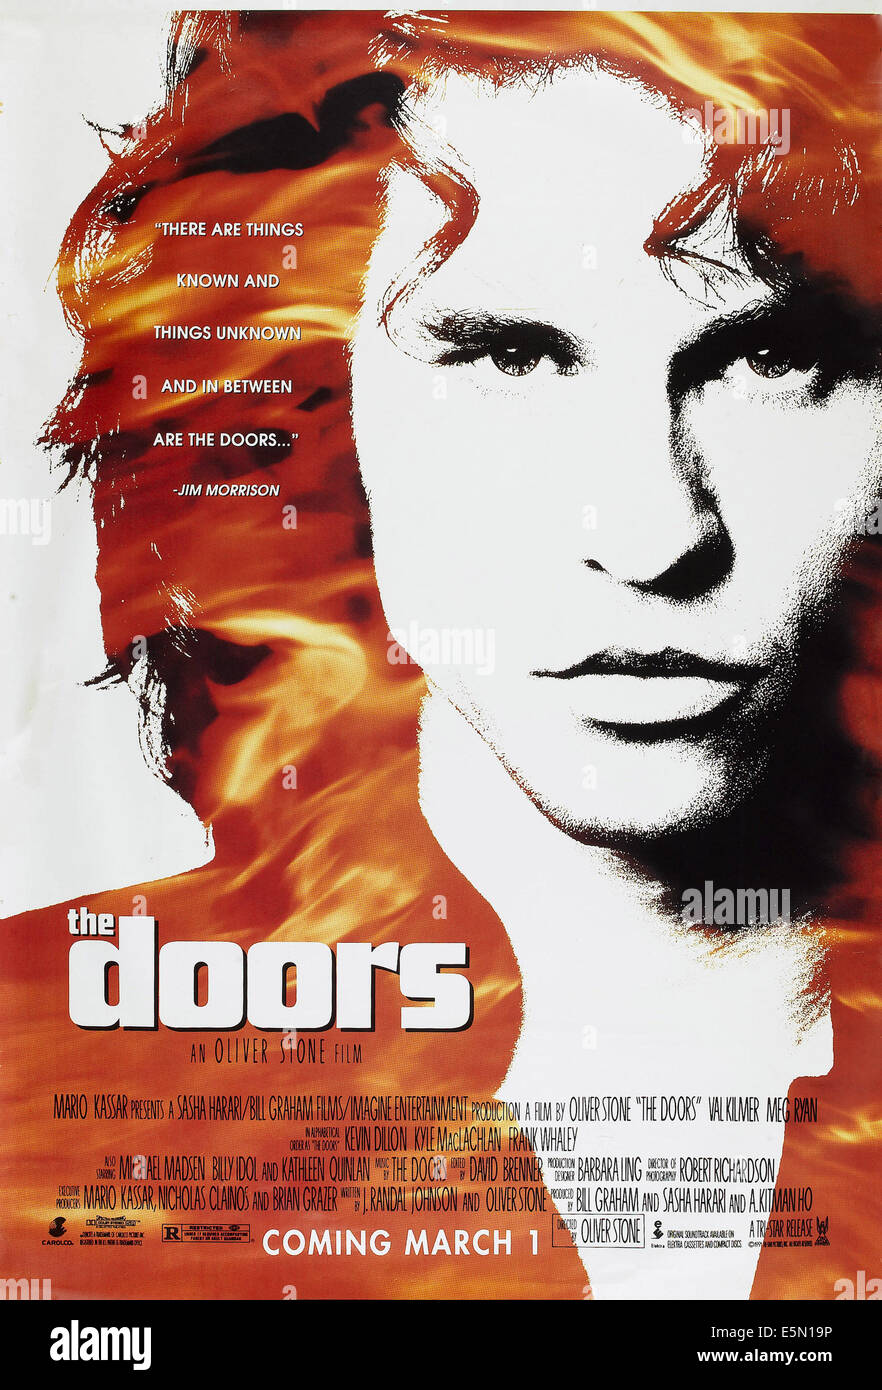 THE DOORS, US advance poster art, Val Kilmer, (as Jim Morrison), 1991, ©TriStar Pictures/courtesy Everett Collection Stock Photo